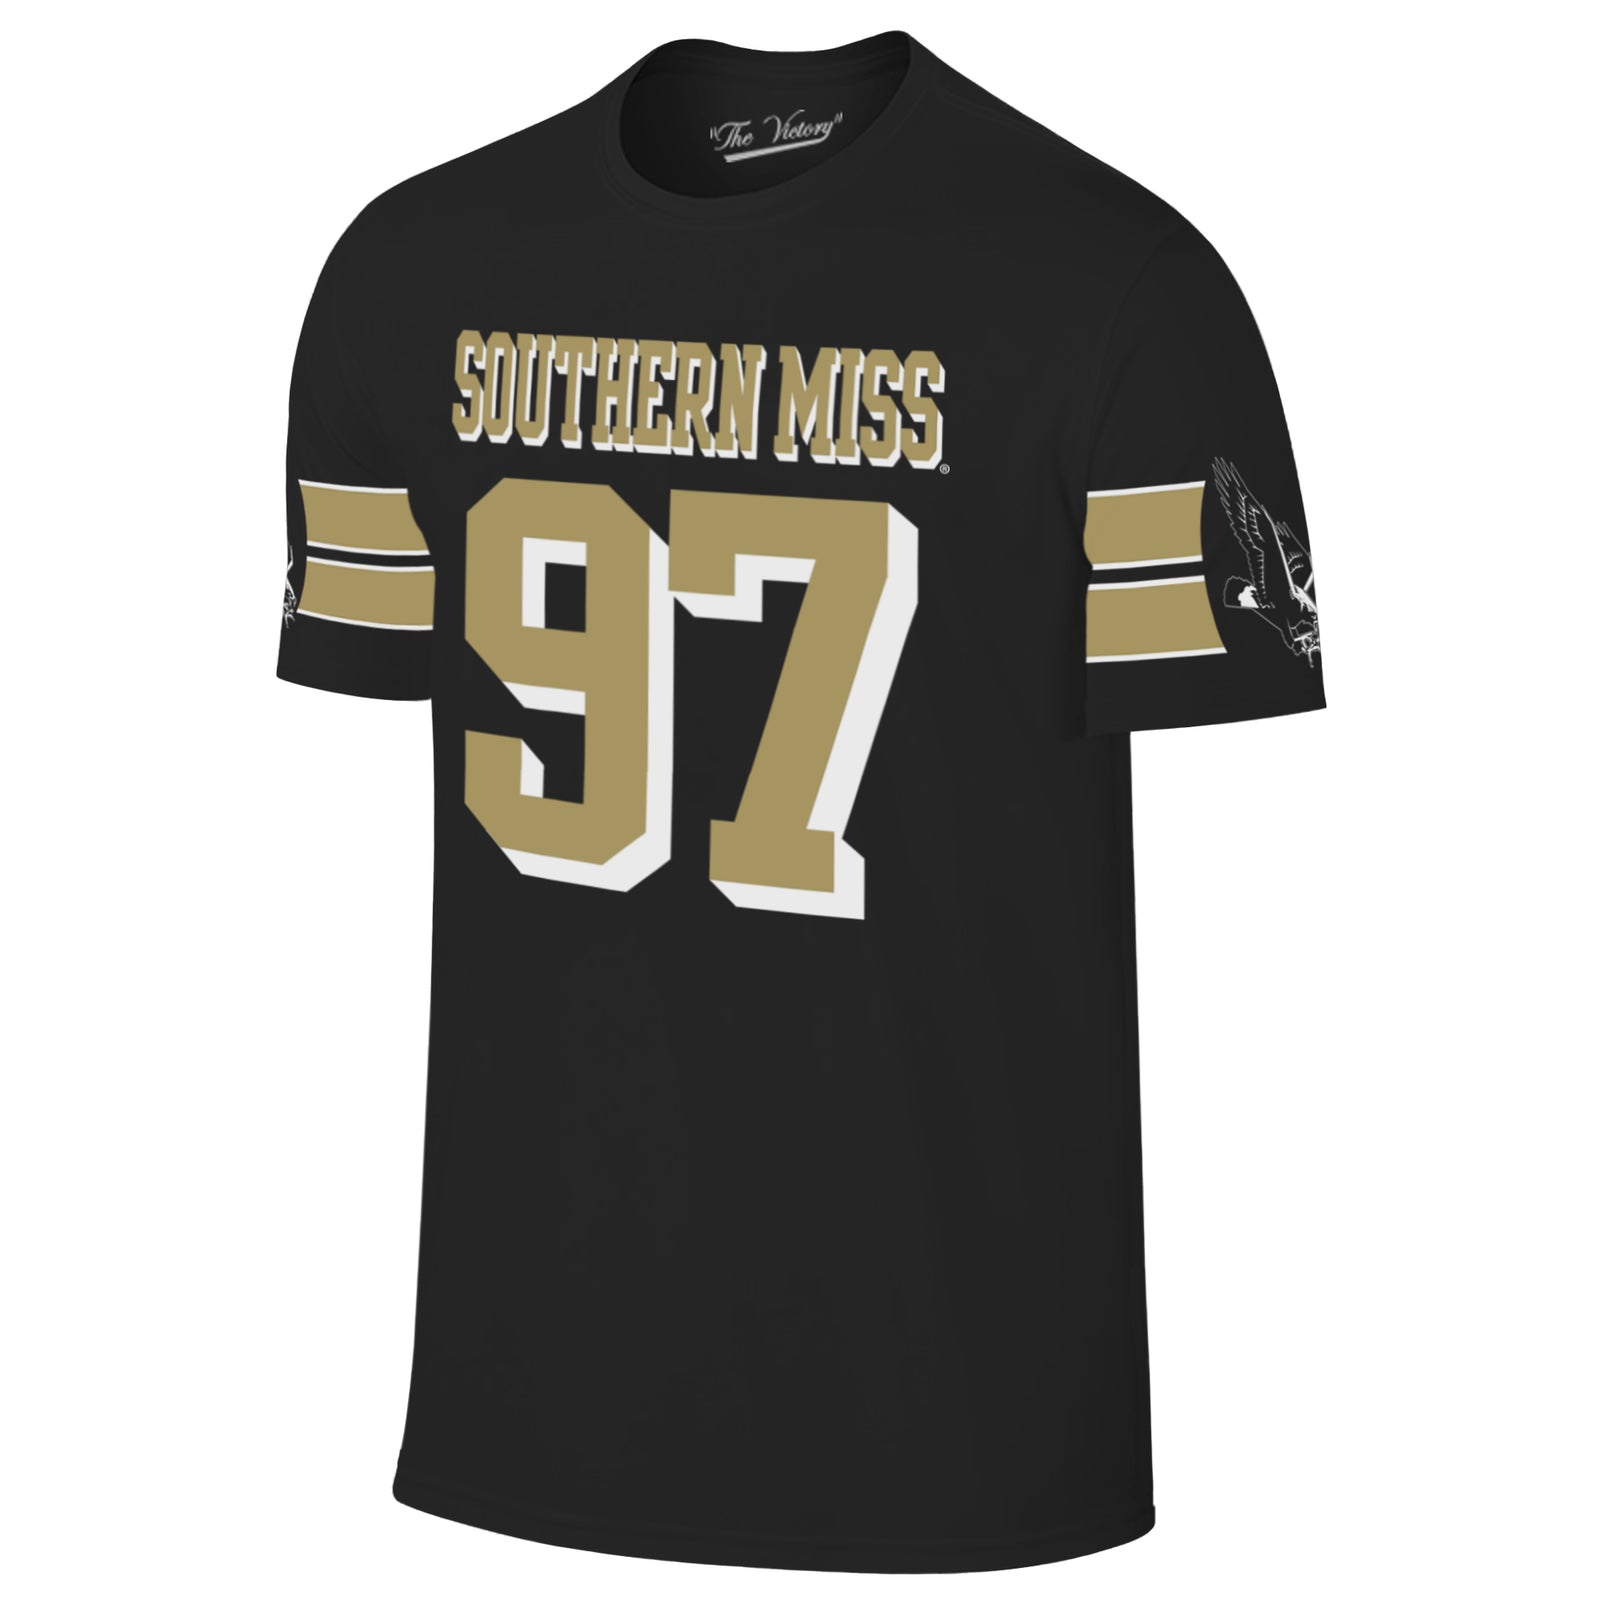 Southern Miss Jersey Tee